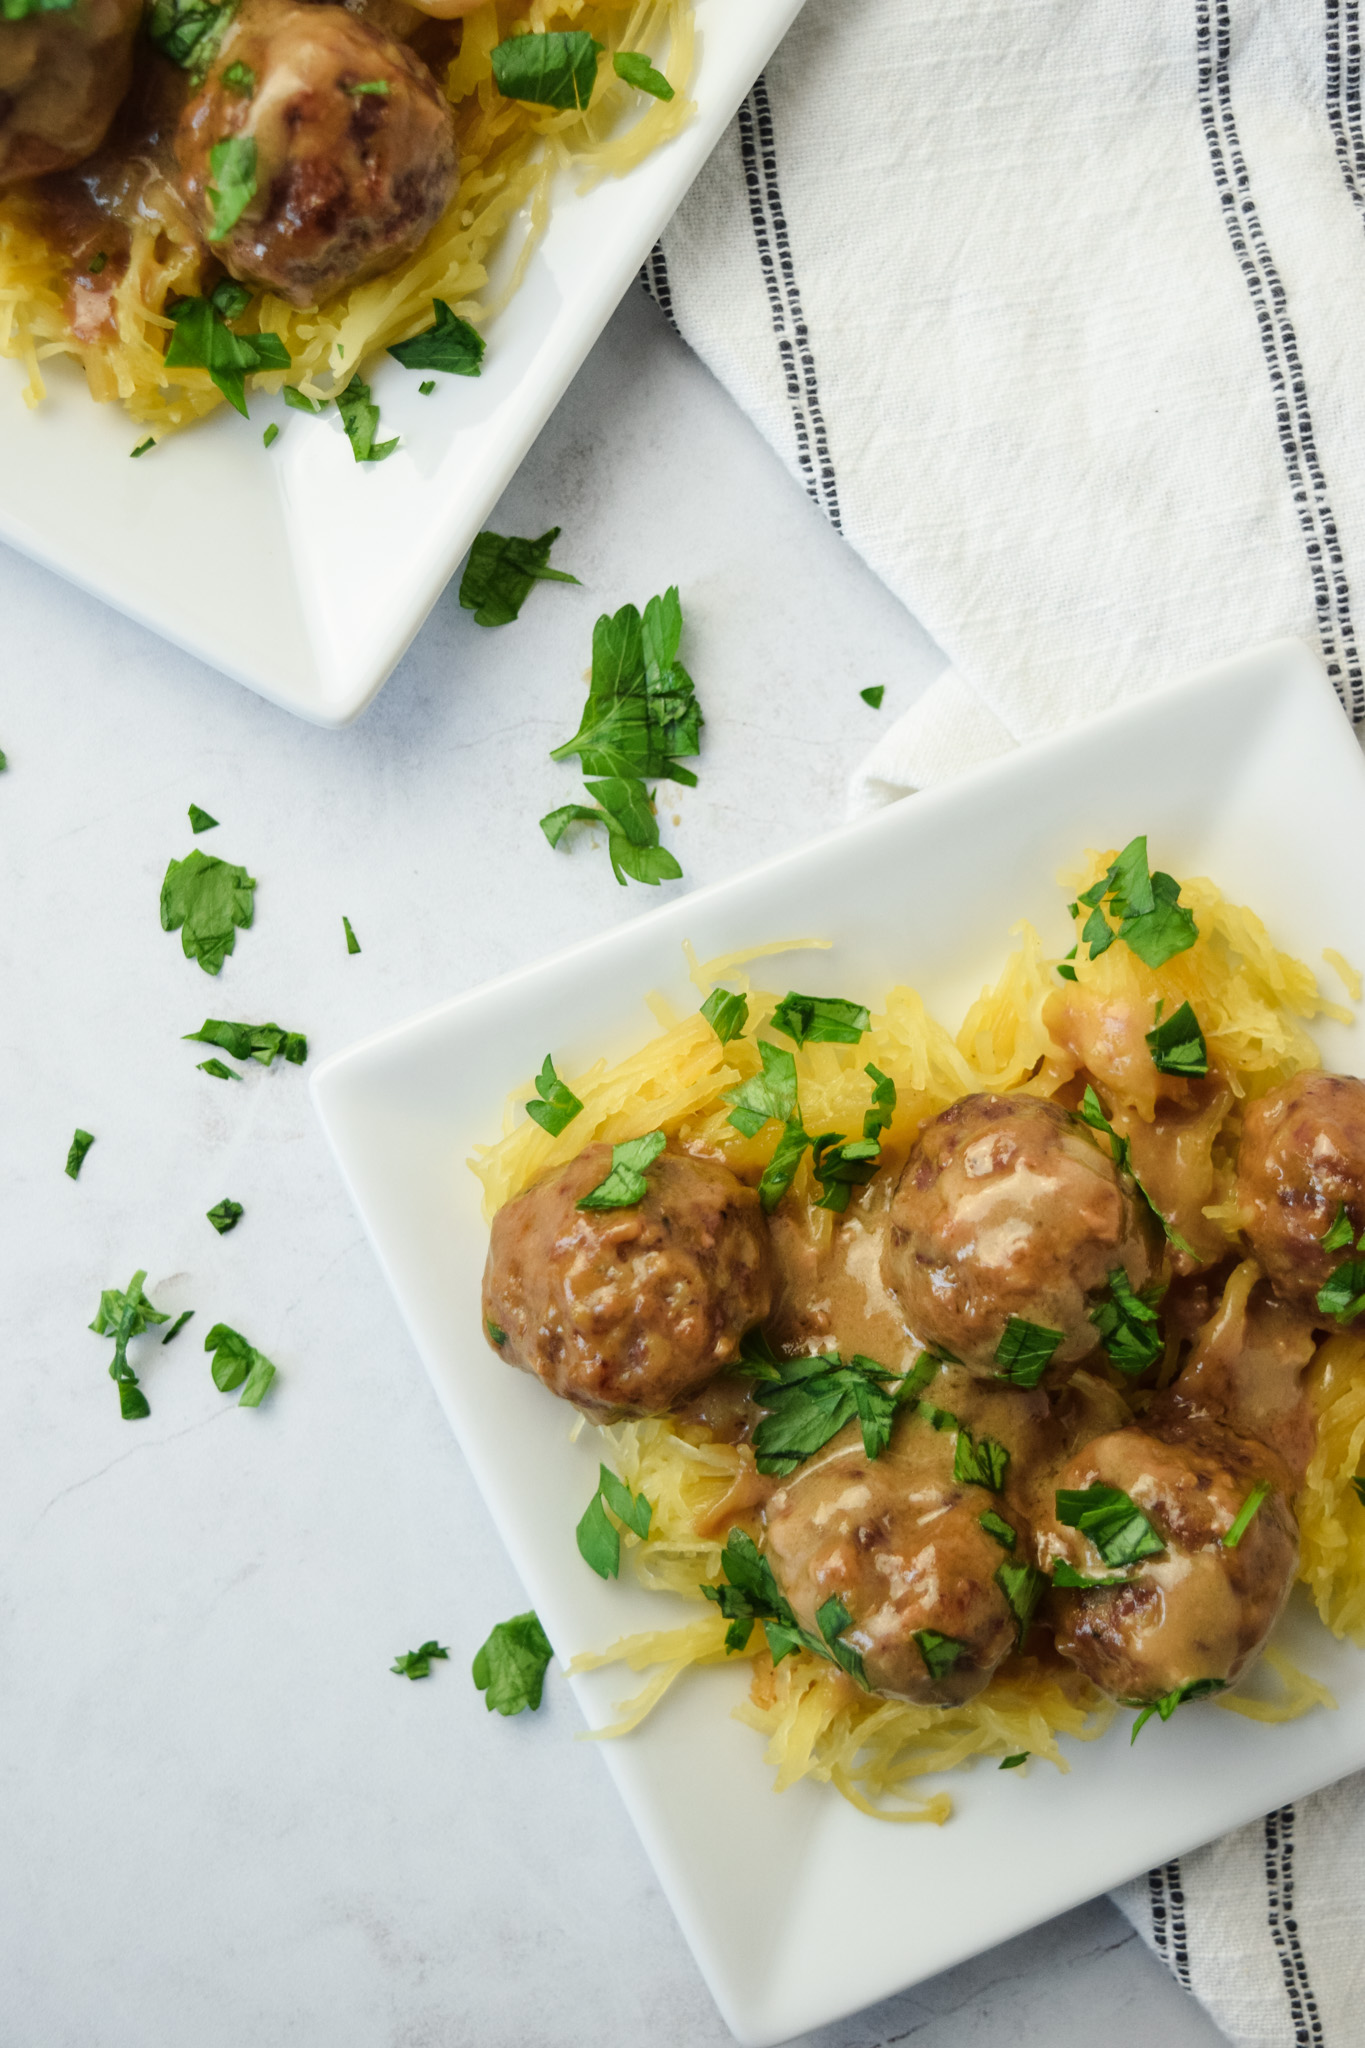 Healthy Swedish Meatballs with Creamy Gravy and Spaghetti Squash Noodles